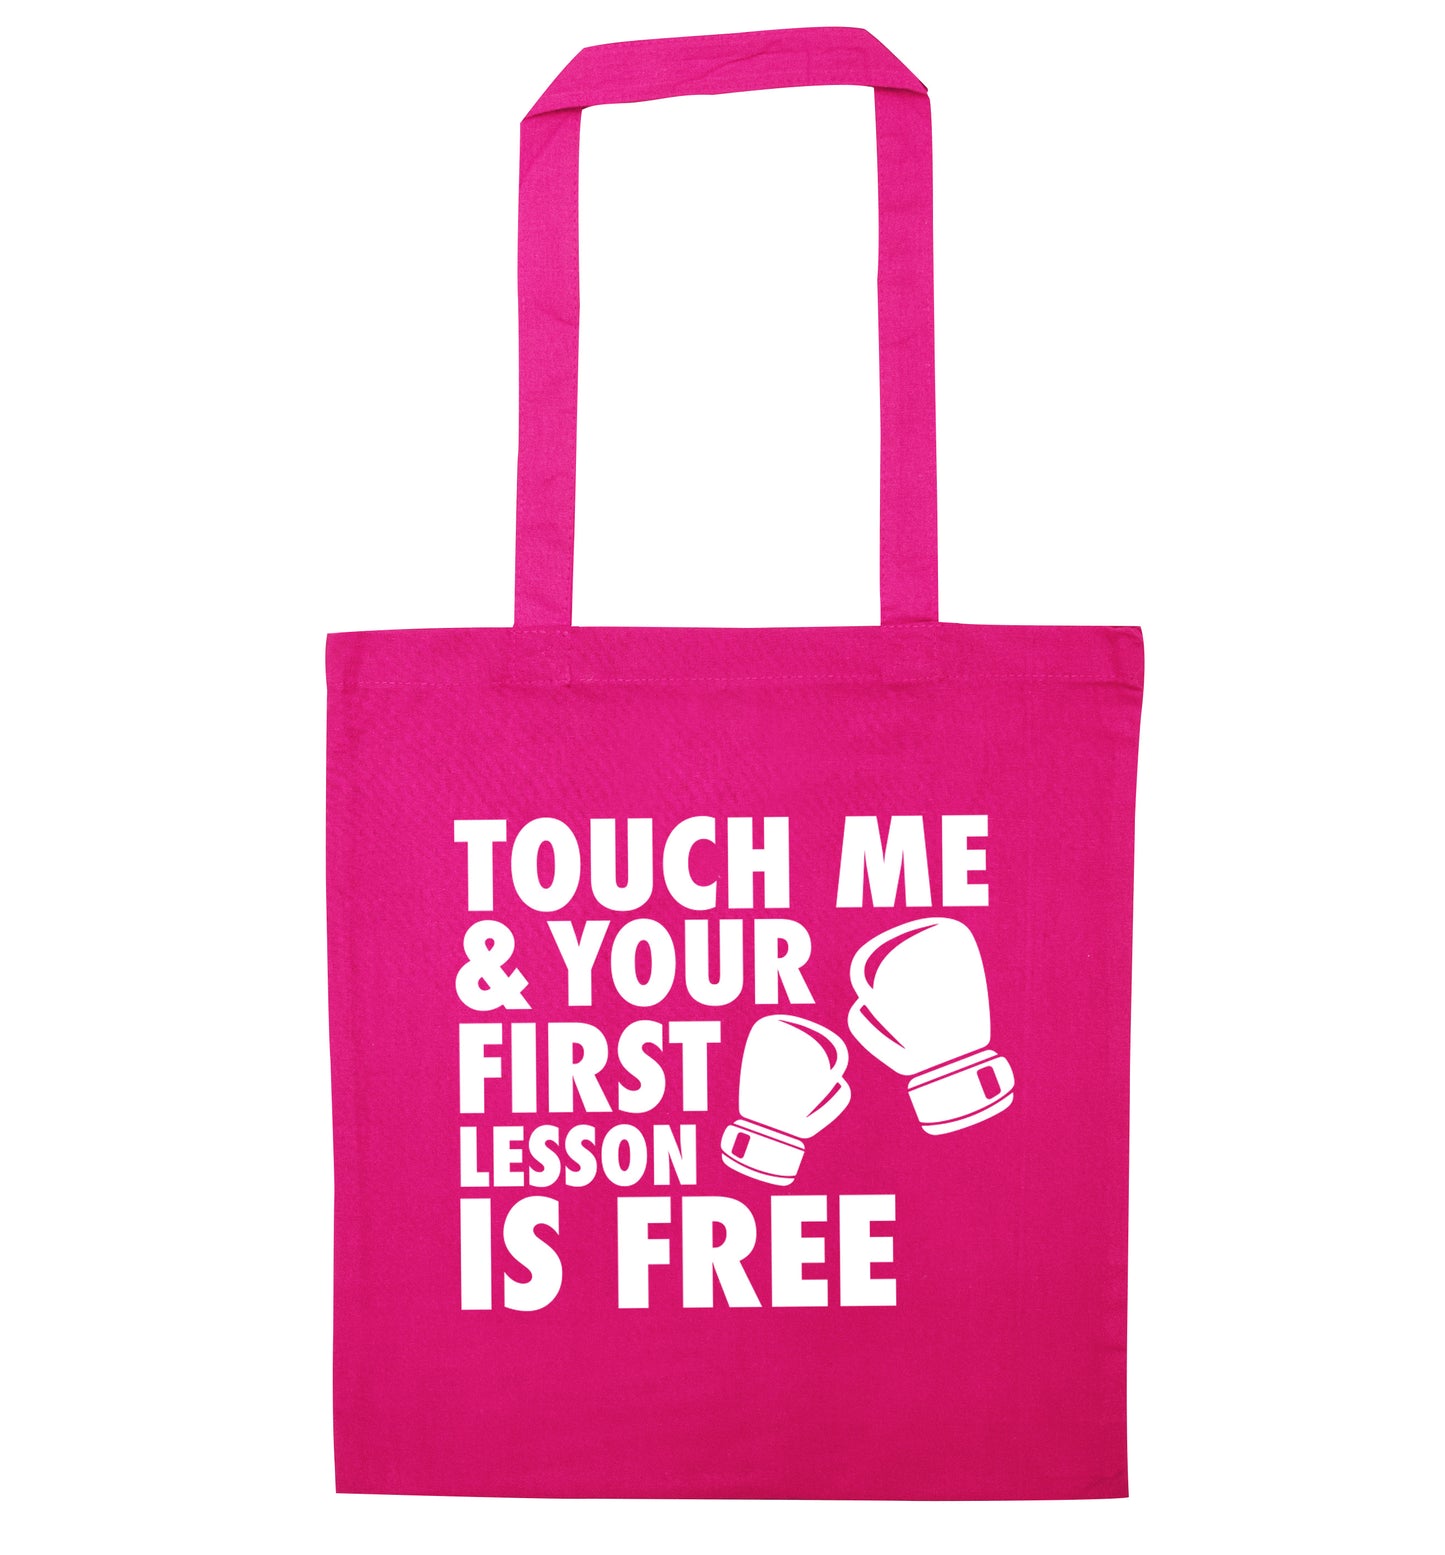 Touch me and your First Lesson is Free  pink tote bag